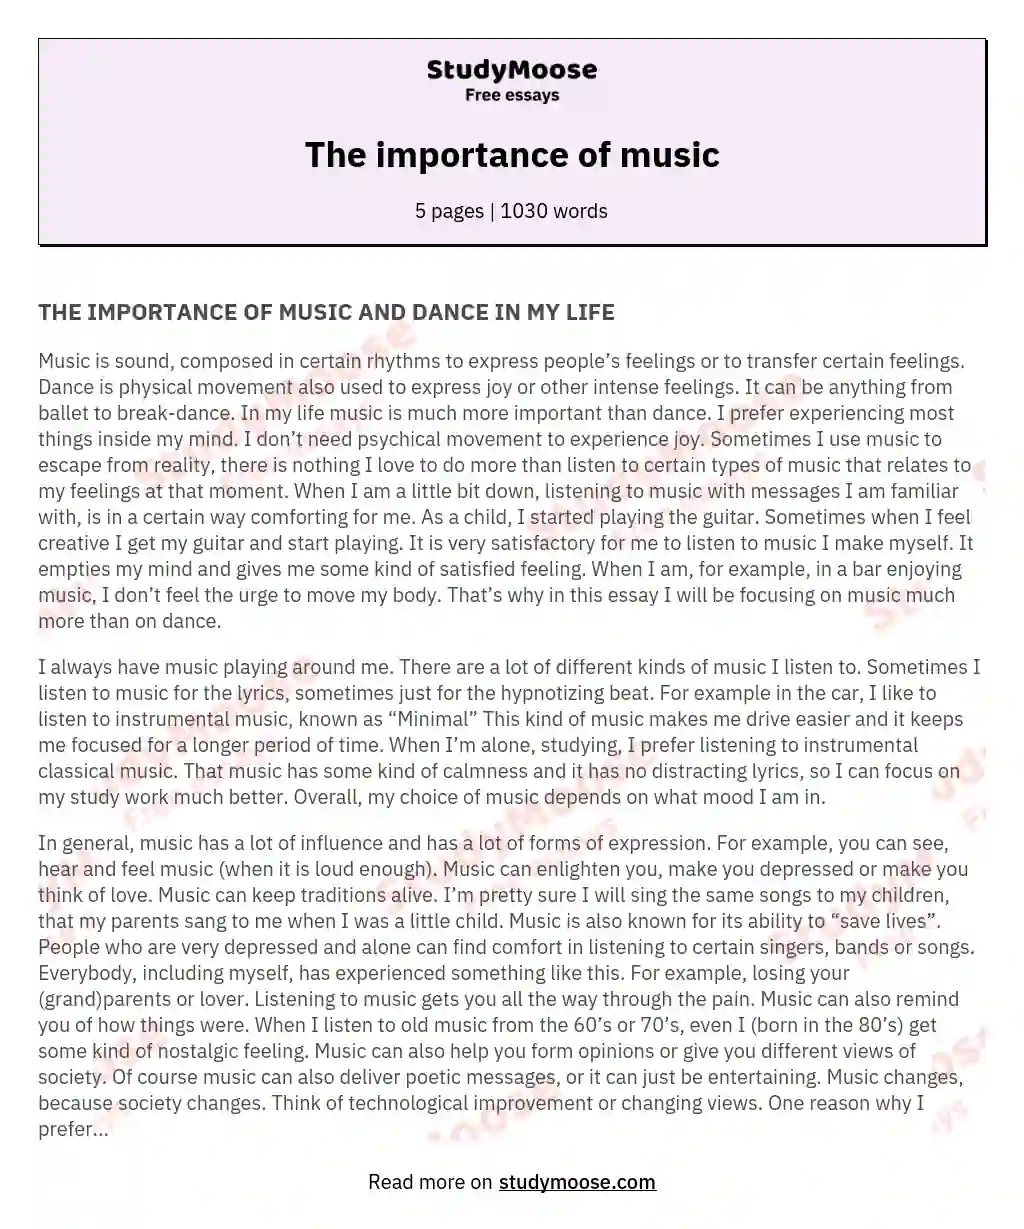 The importance of music essay